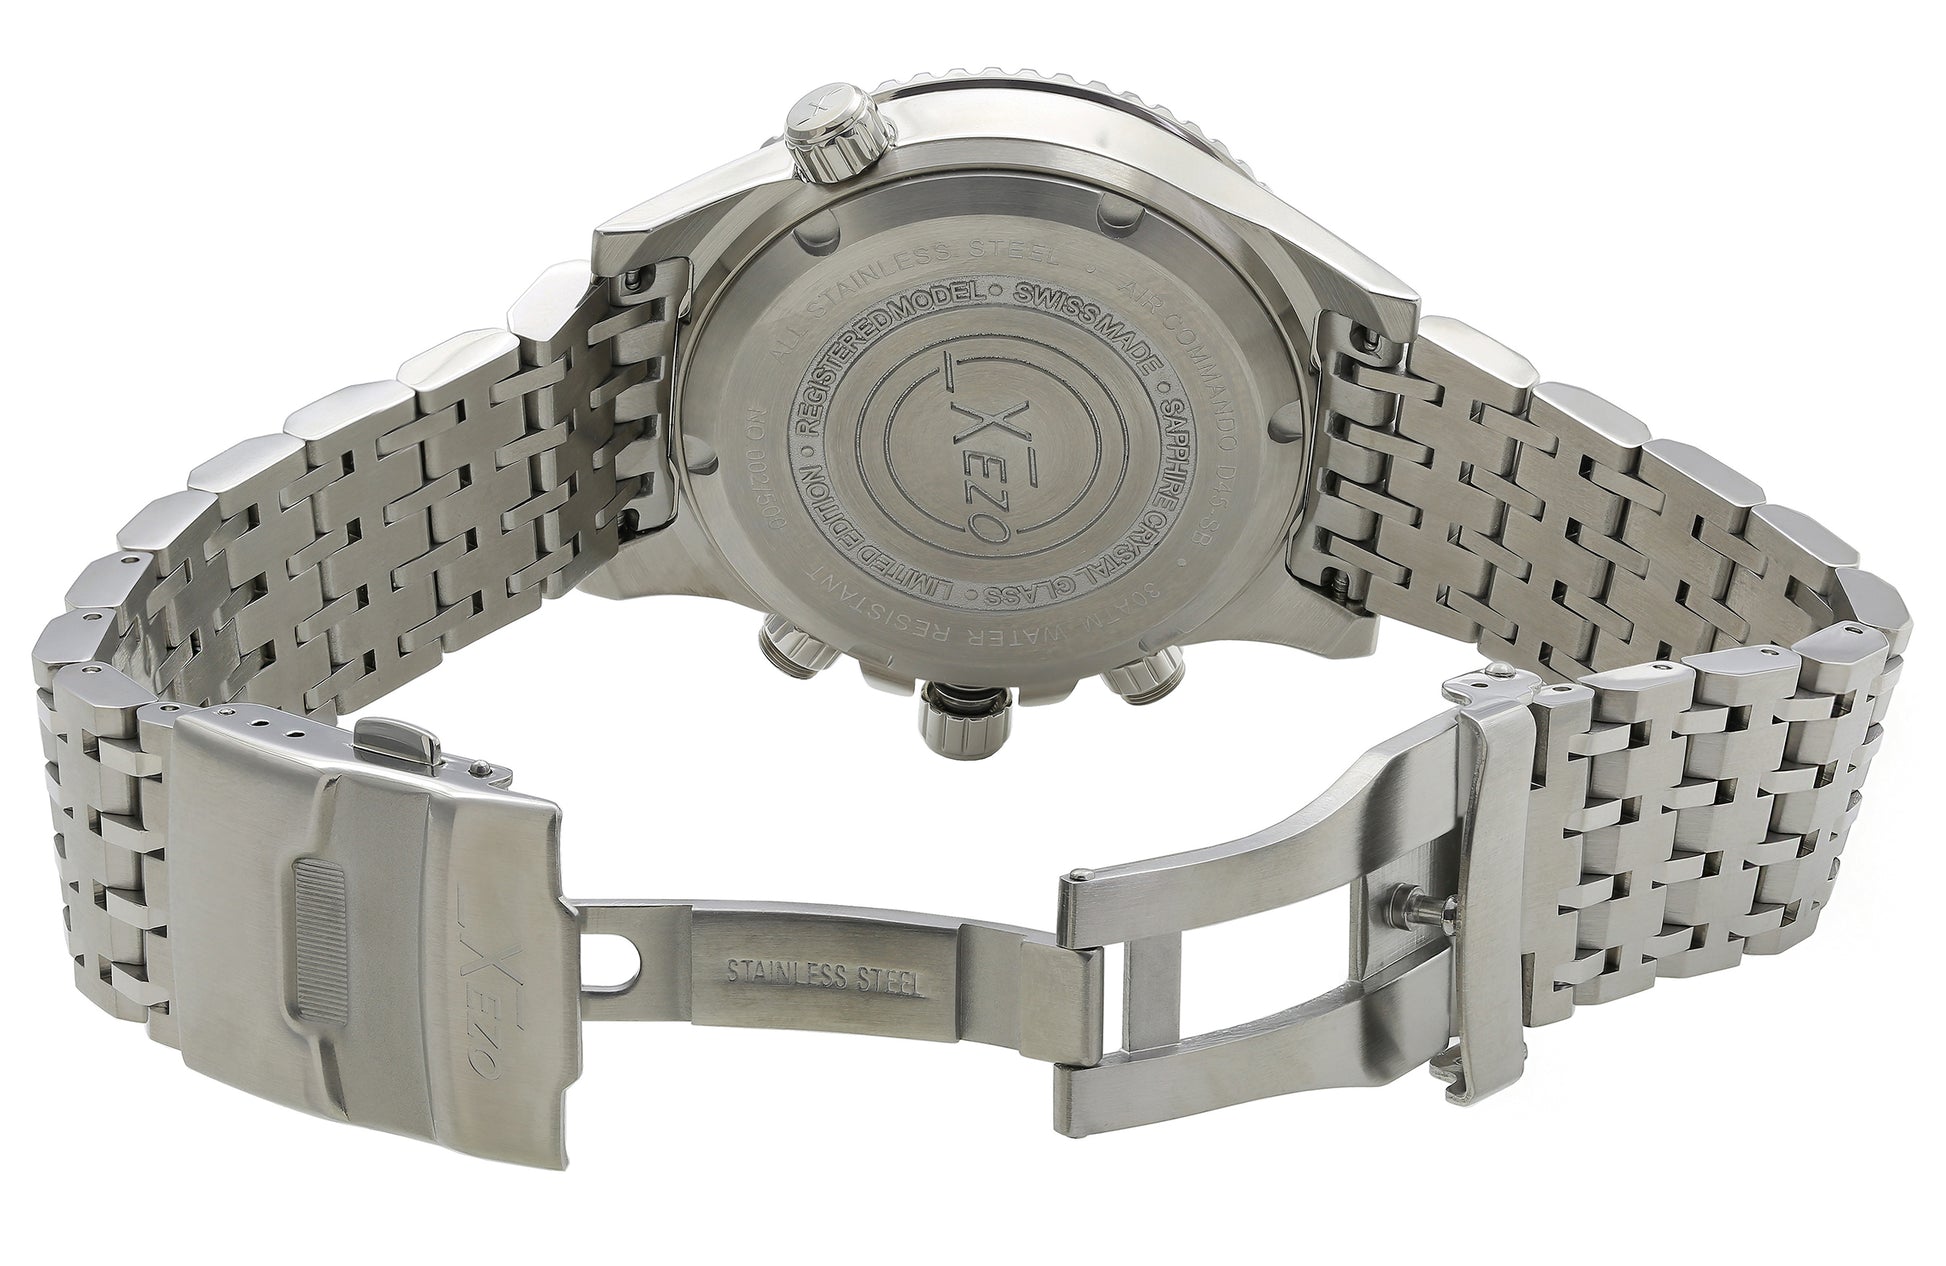 Xezo - Overview of the back of the Air Commando D45-SB watch